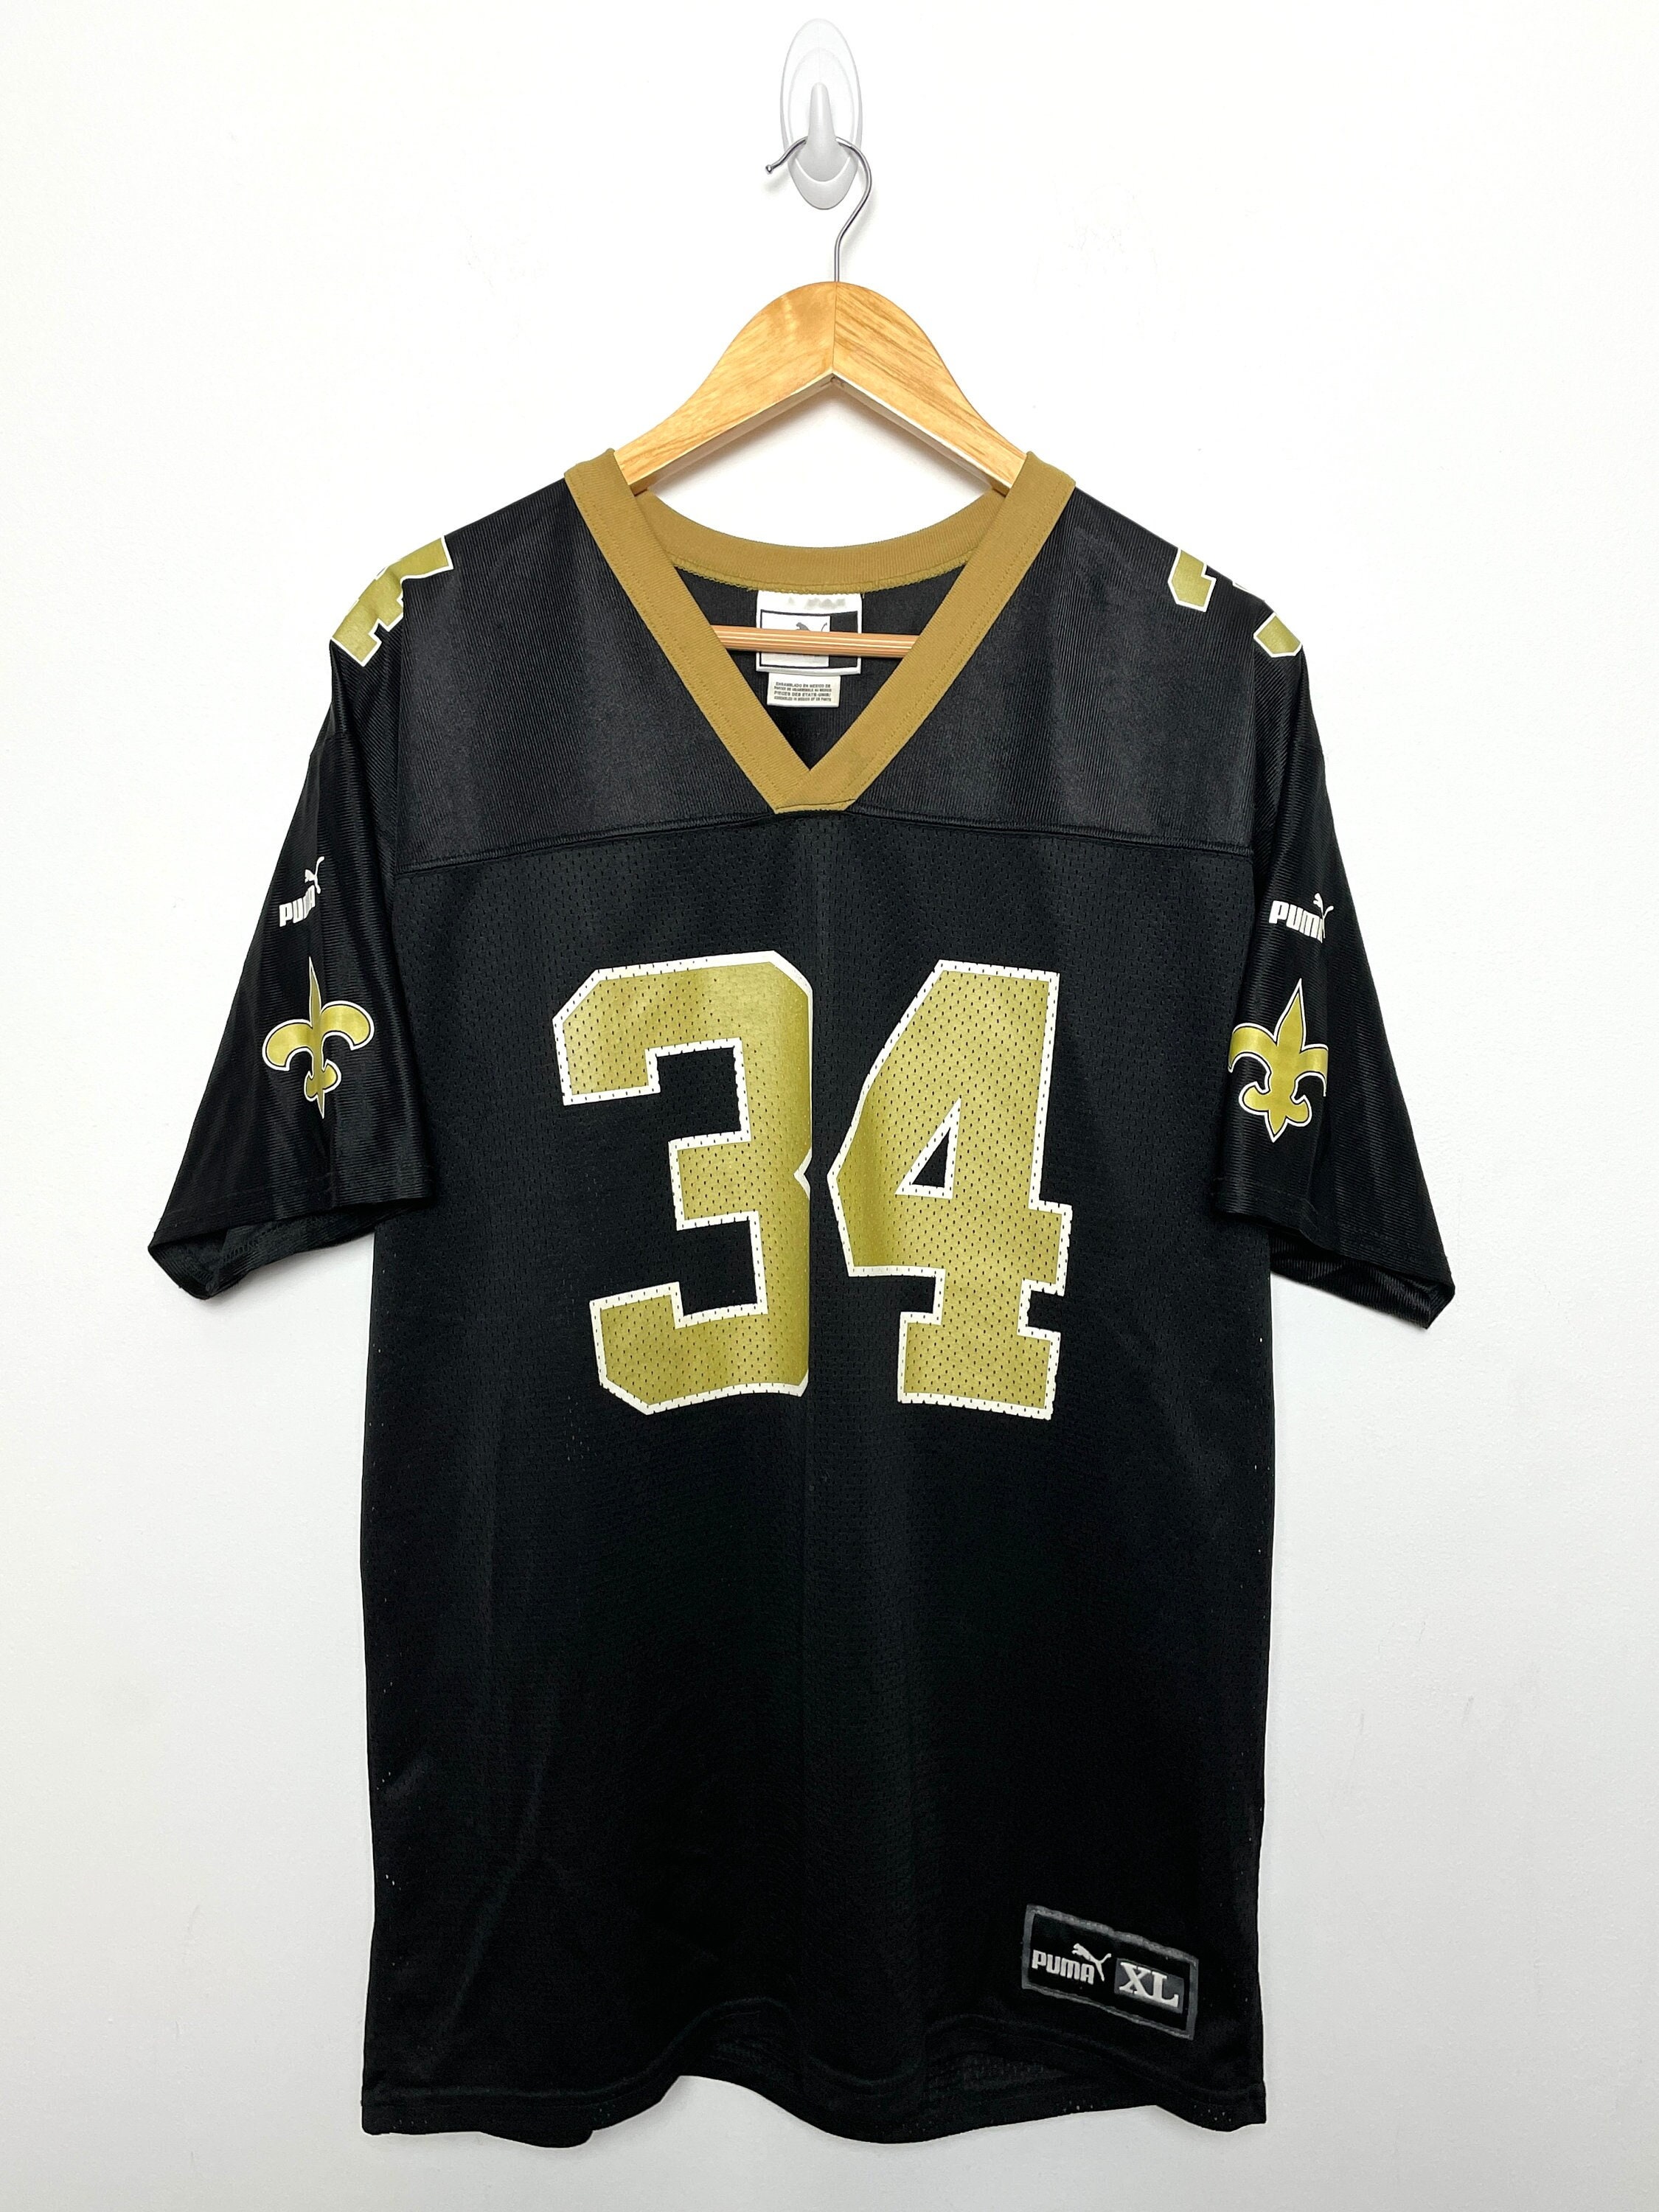 New Orleans Saints NFL Game Issued Football Pants - Size 30 Short